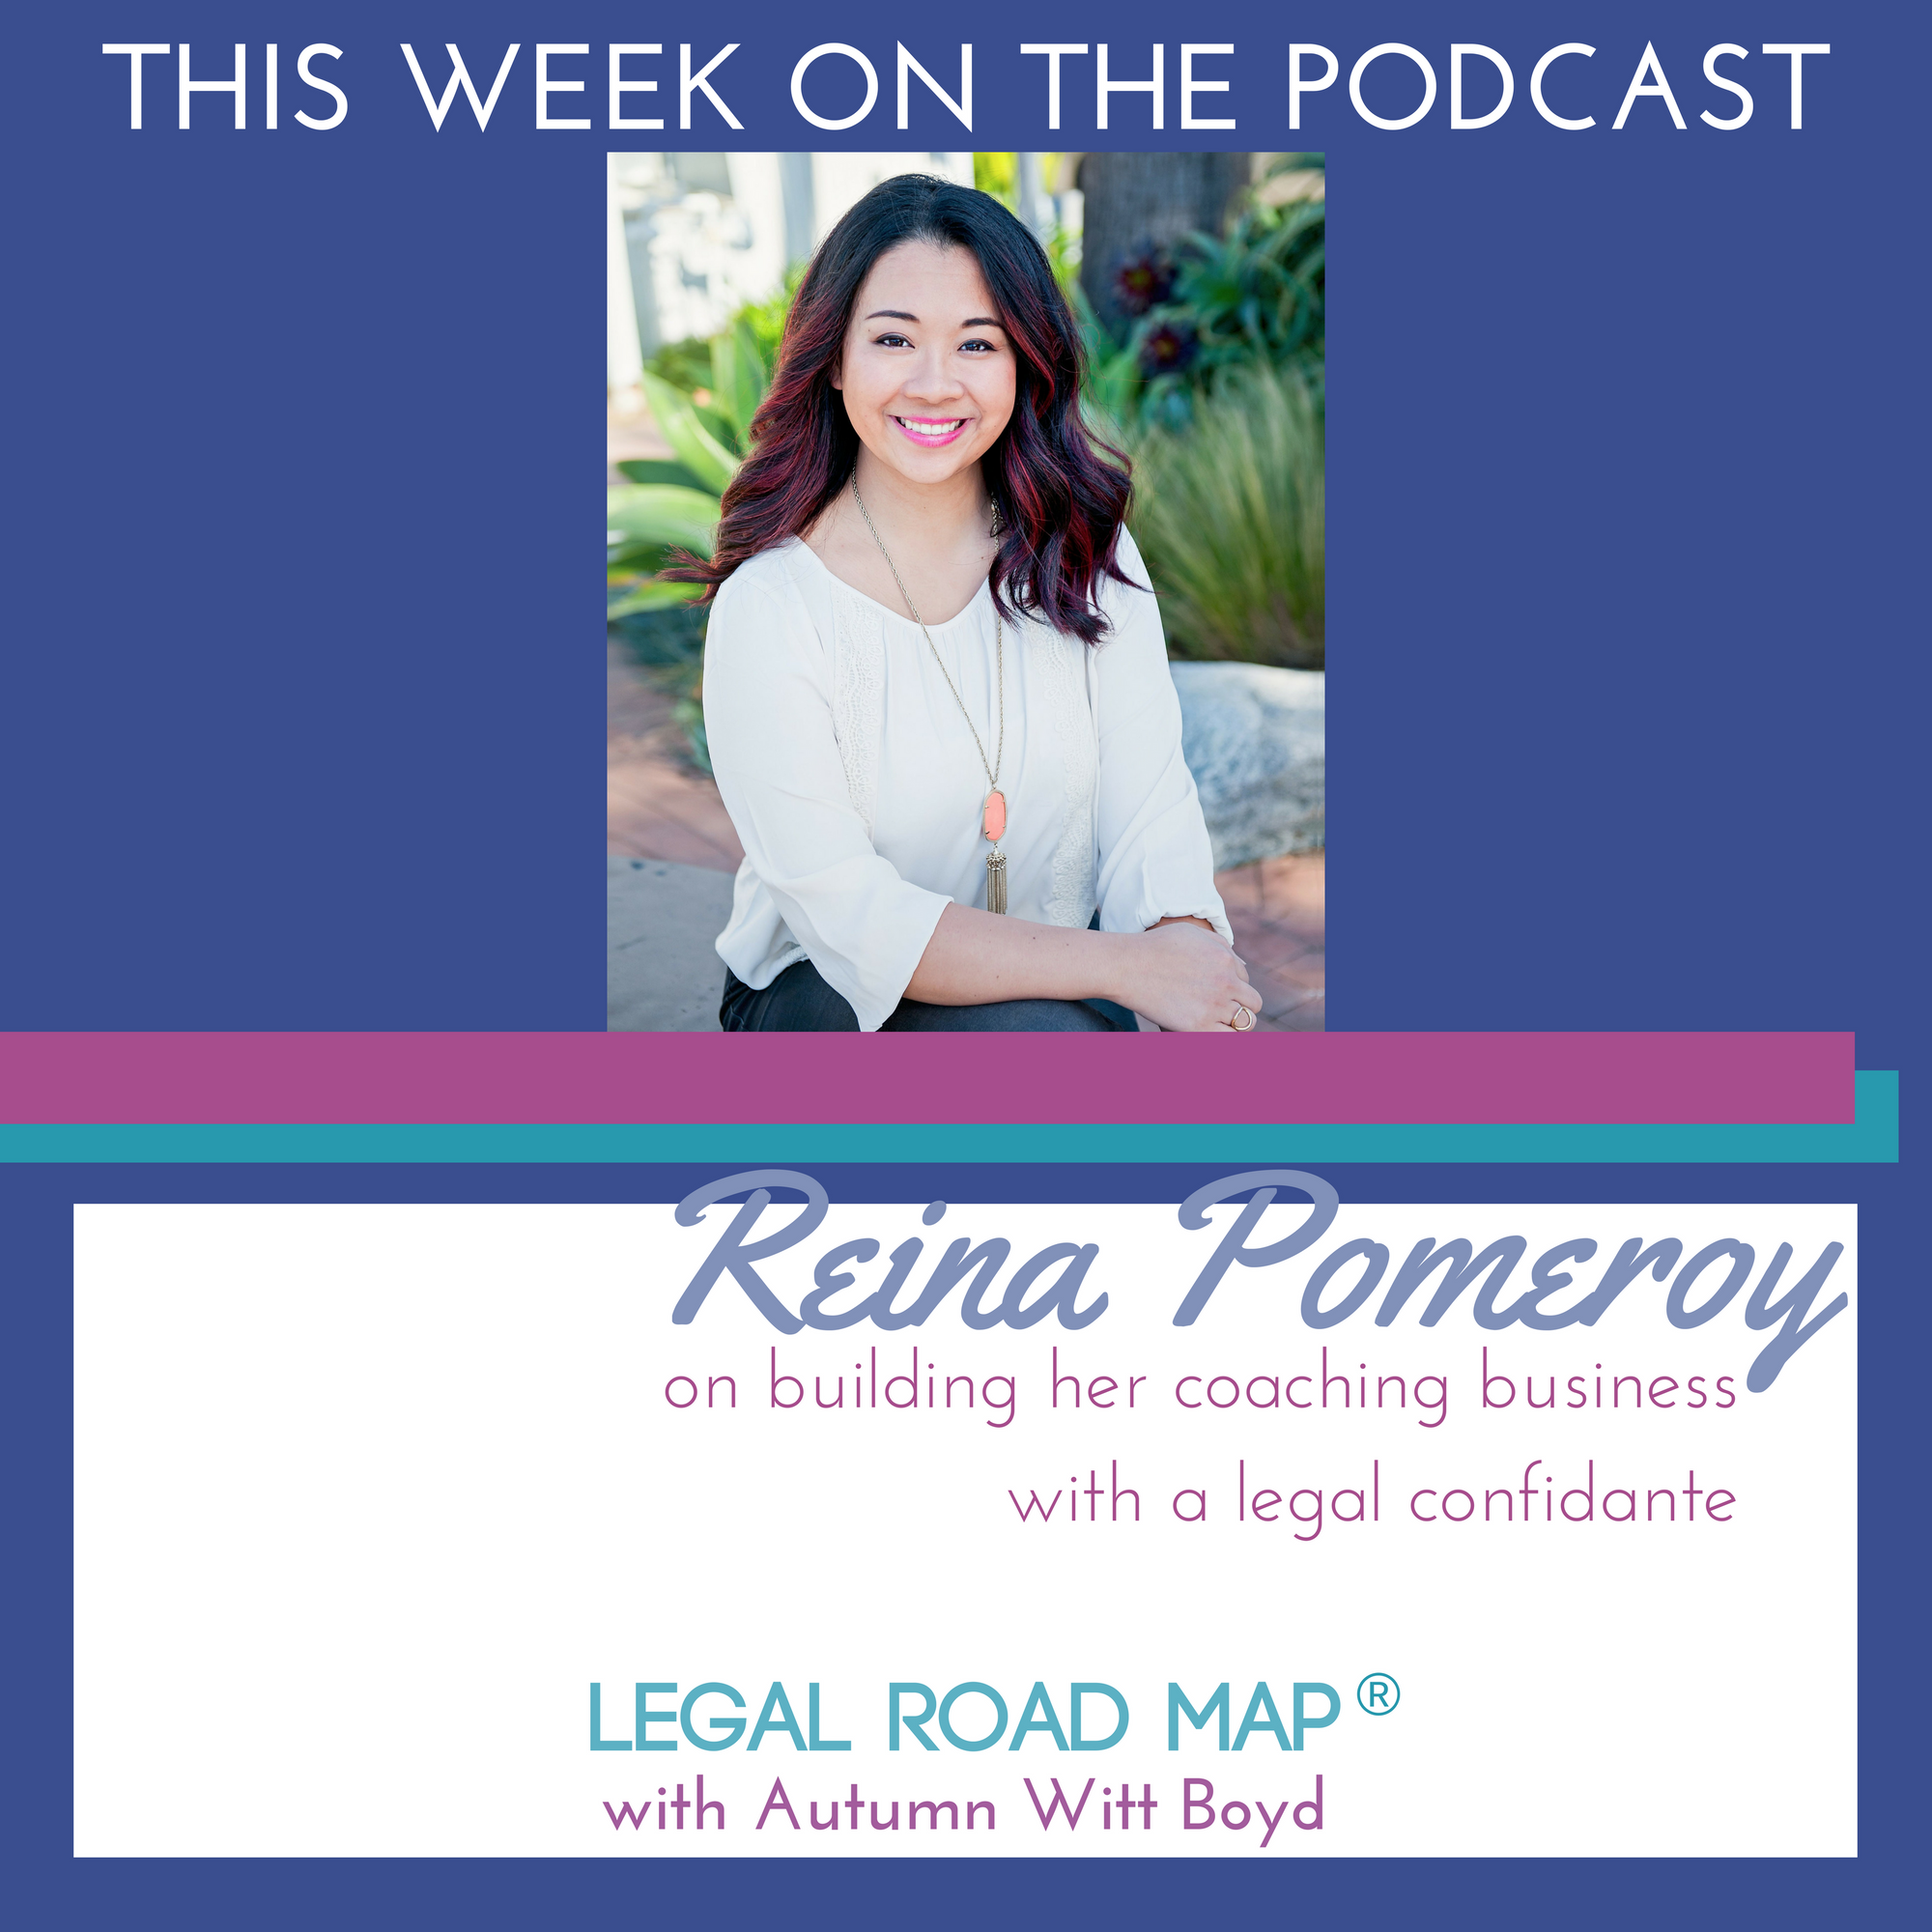 Reina Pomeroy on building her coaching business with a legal confidante (Legal Road Map® Podcast S2E14)